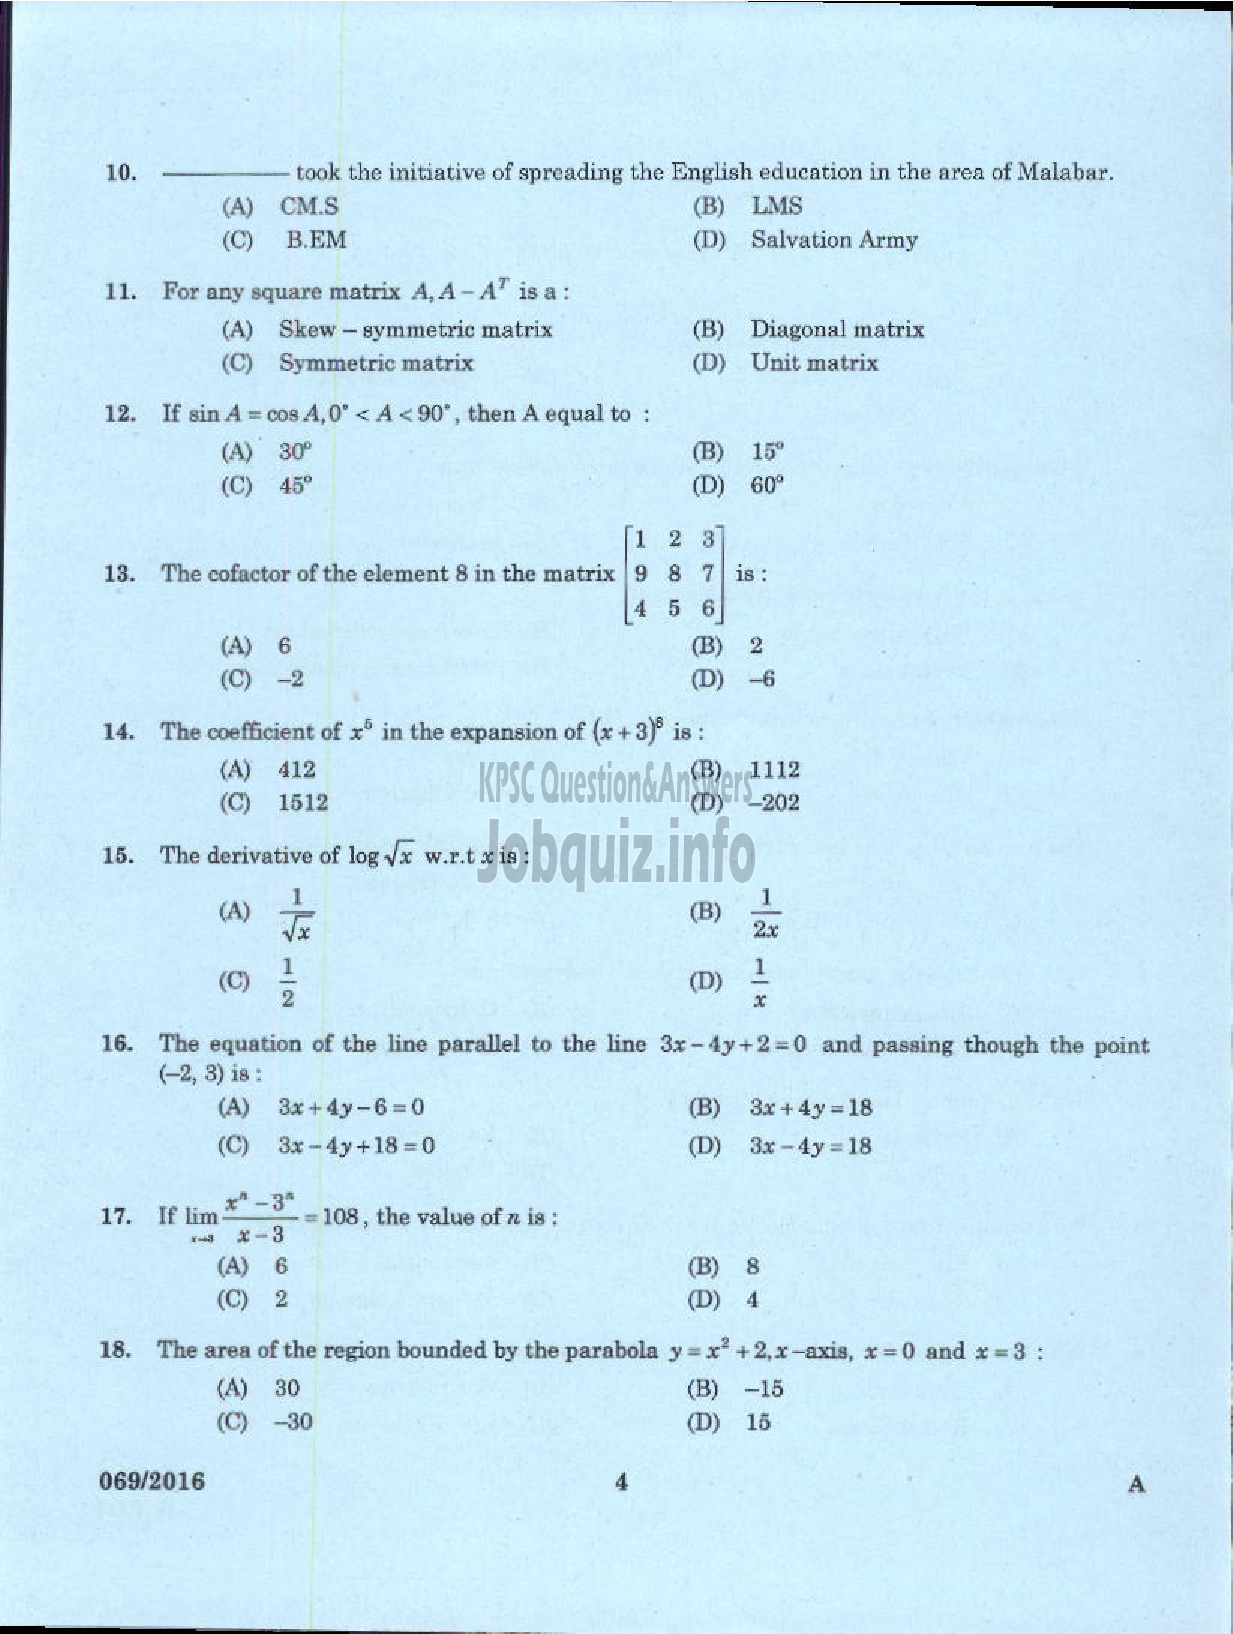 Kerala PSC Question Paper - LECTURER IN ELECTRONICS AND INSTRUMENTATION POLYTECHNICS TECHNICAL EDUCATION-2